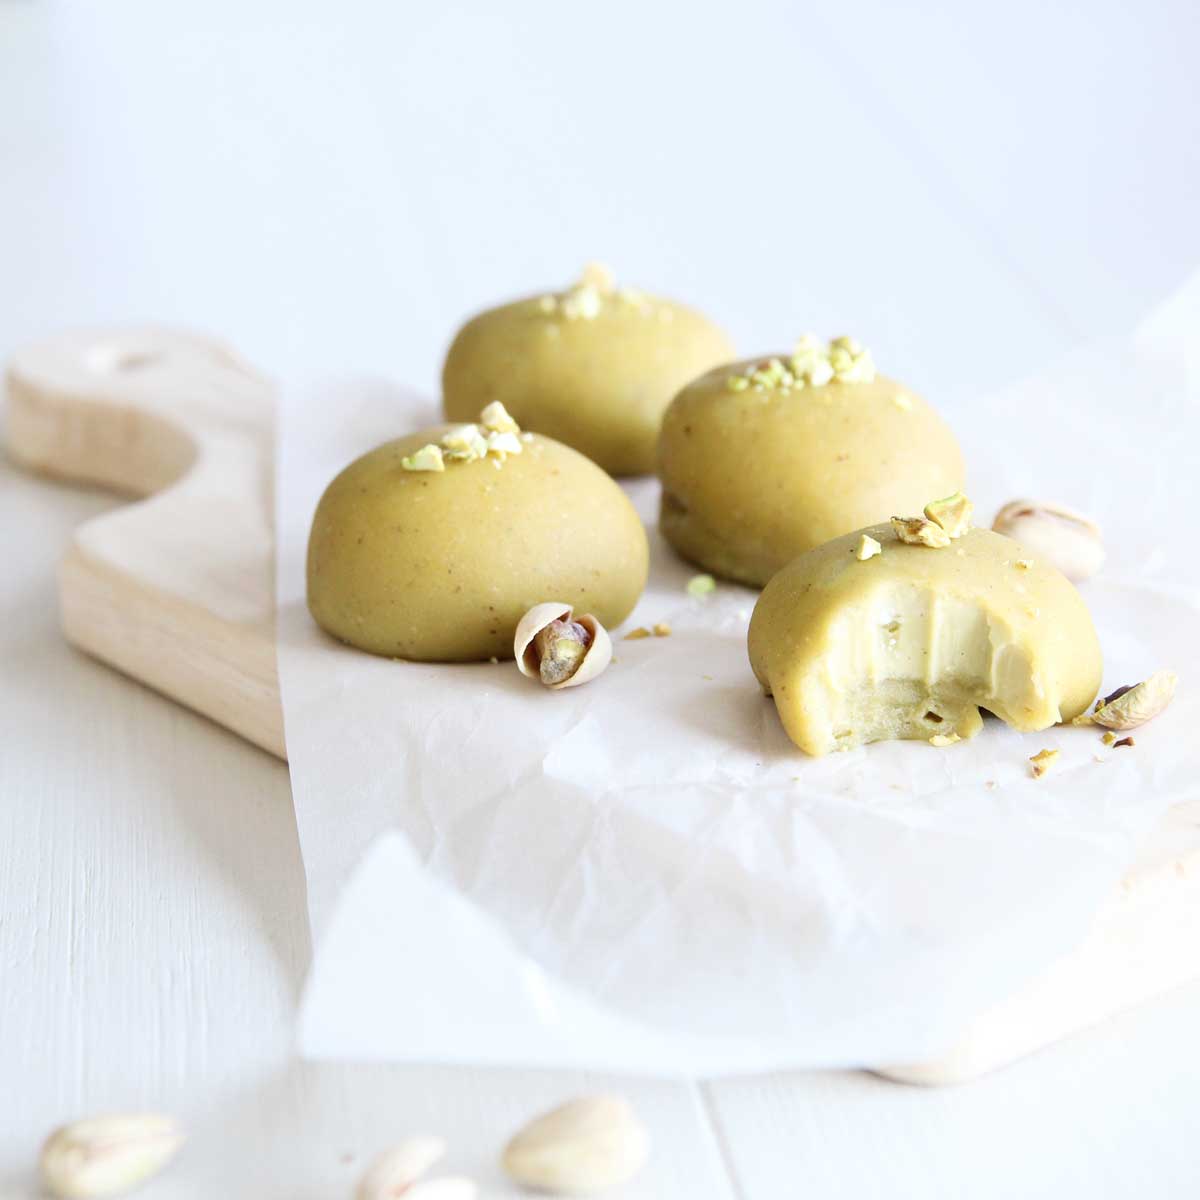 The Best Ever Pistachio Butter Mochi (Made with Mochiko Flour) - Peanut Butter Easter Eggs